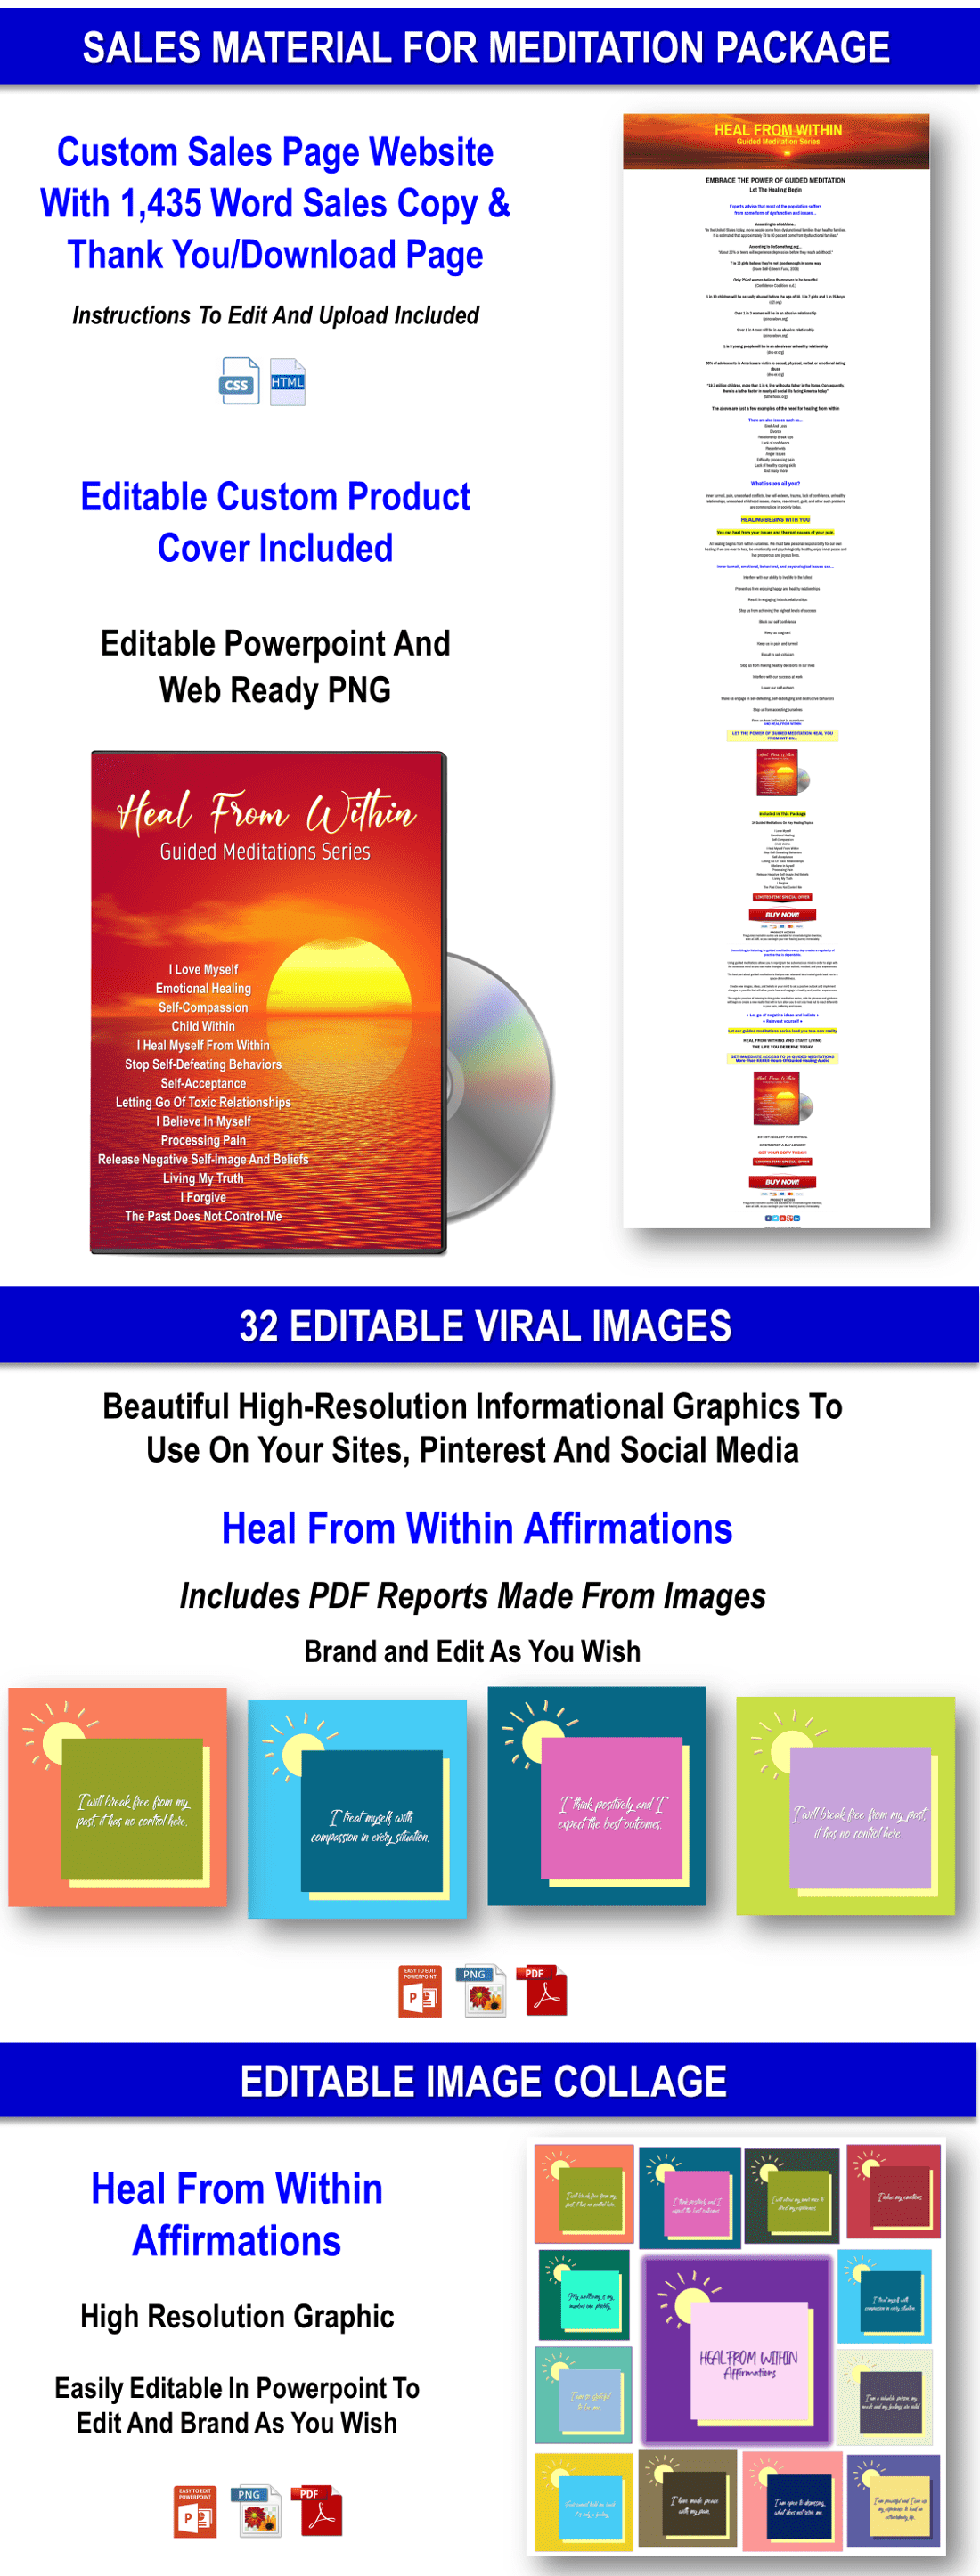 14 Guided Meditation Audios, Sales Materials + Private Label Rights